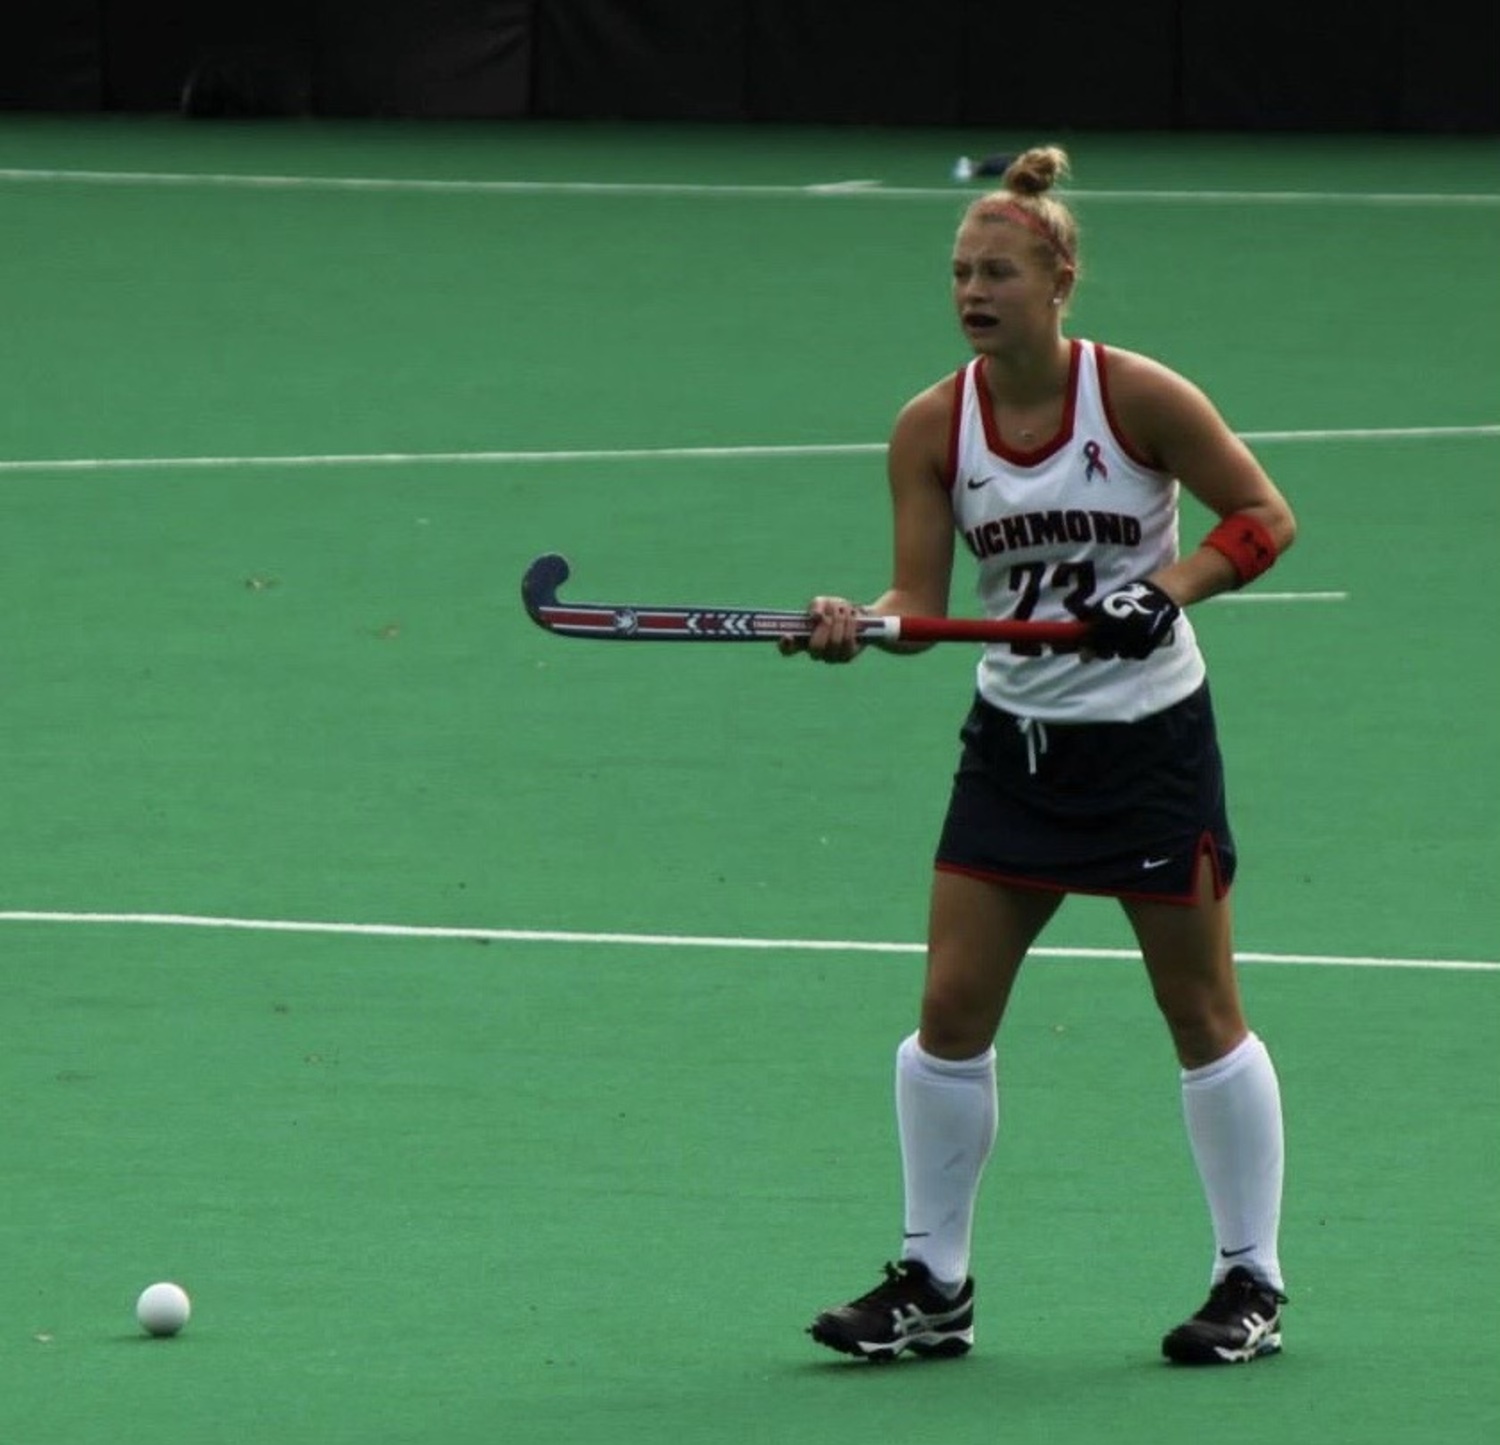 Pierson graduate Kasey Gilbride was a standout player for the University of Richmond after leading the Whalers to a state championship in 2013.